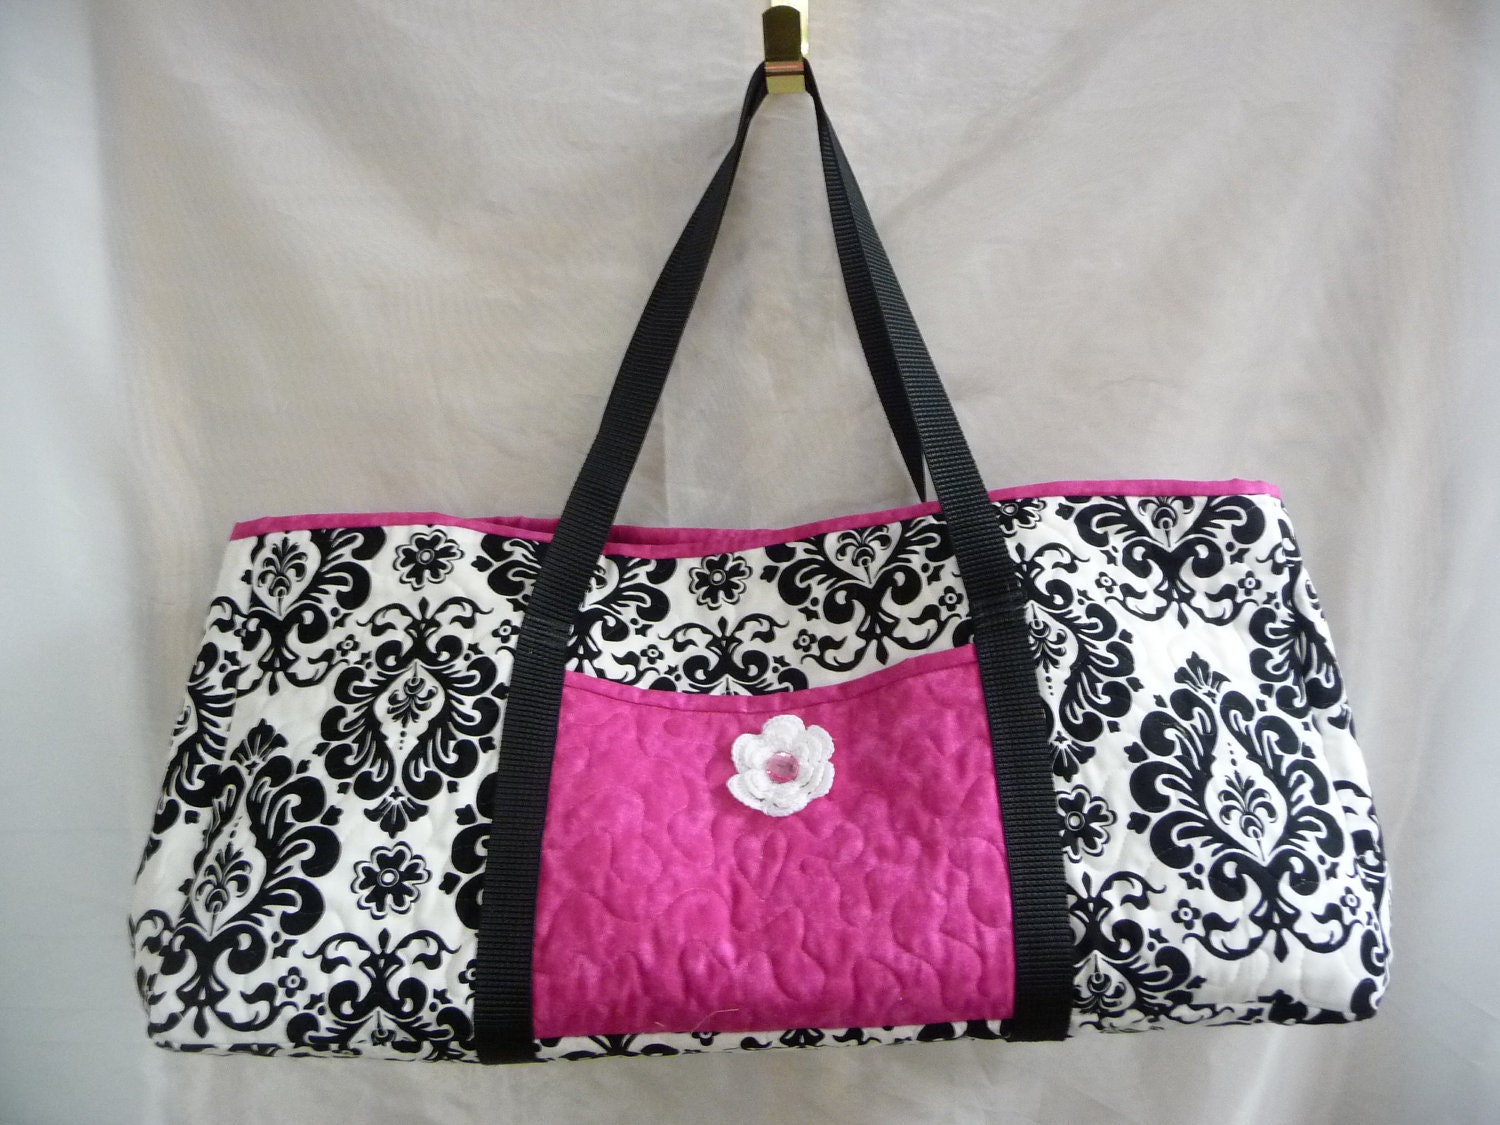 CUSTOM TOTE BAG for Cricut or Silhouette by KathysCozies on Etsy